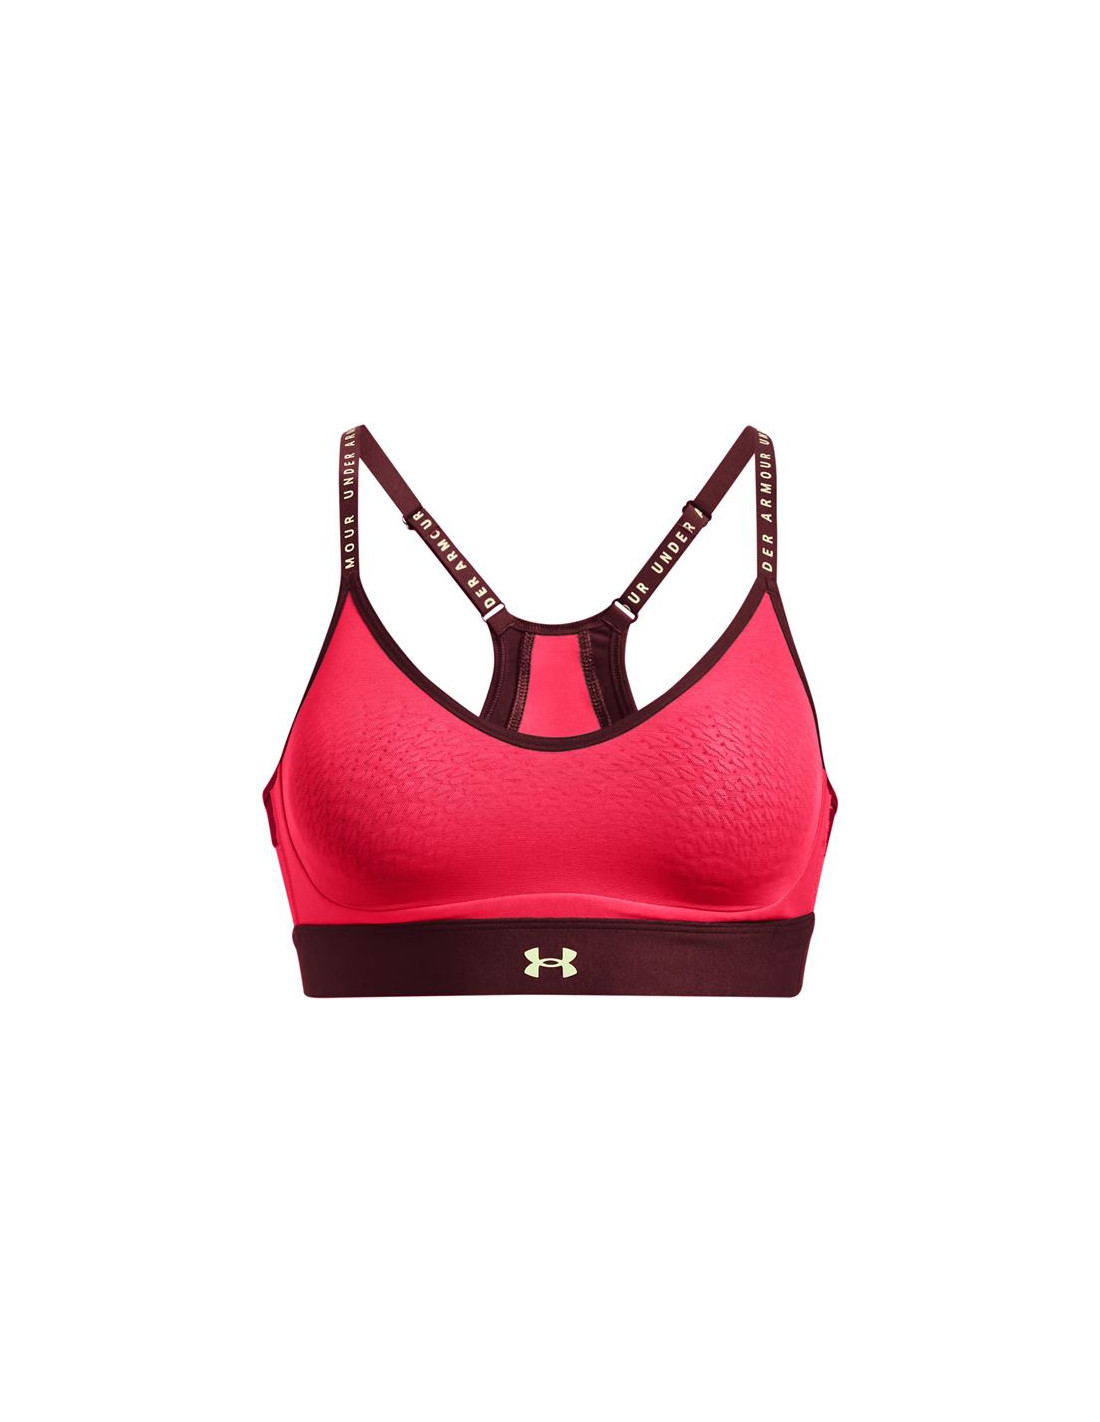 Brassiere - Under Armour - Infinity - Suporte leve - Mulher - Gray